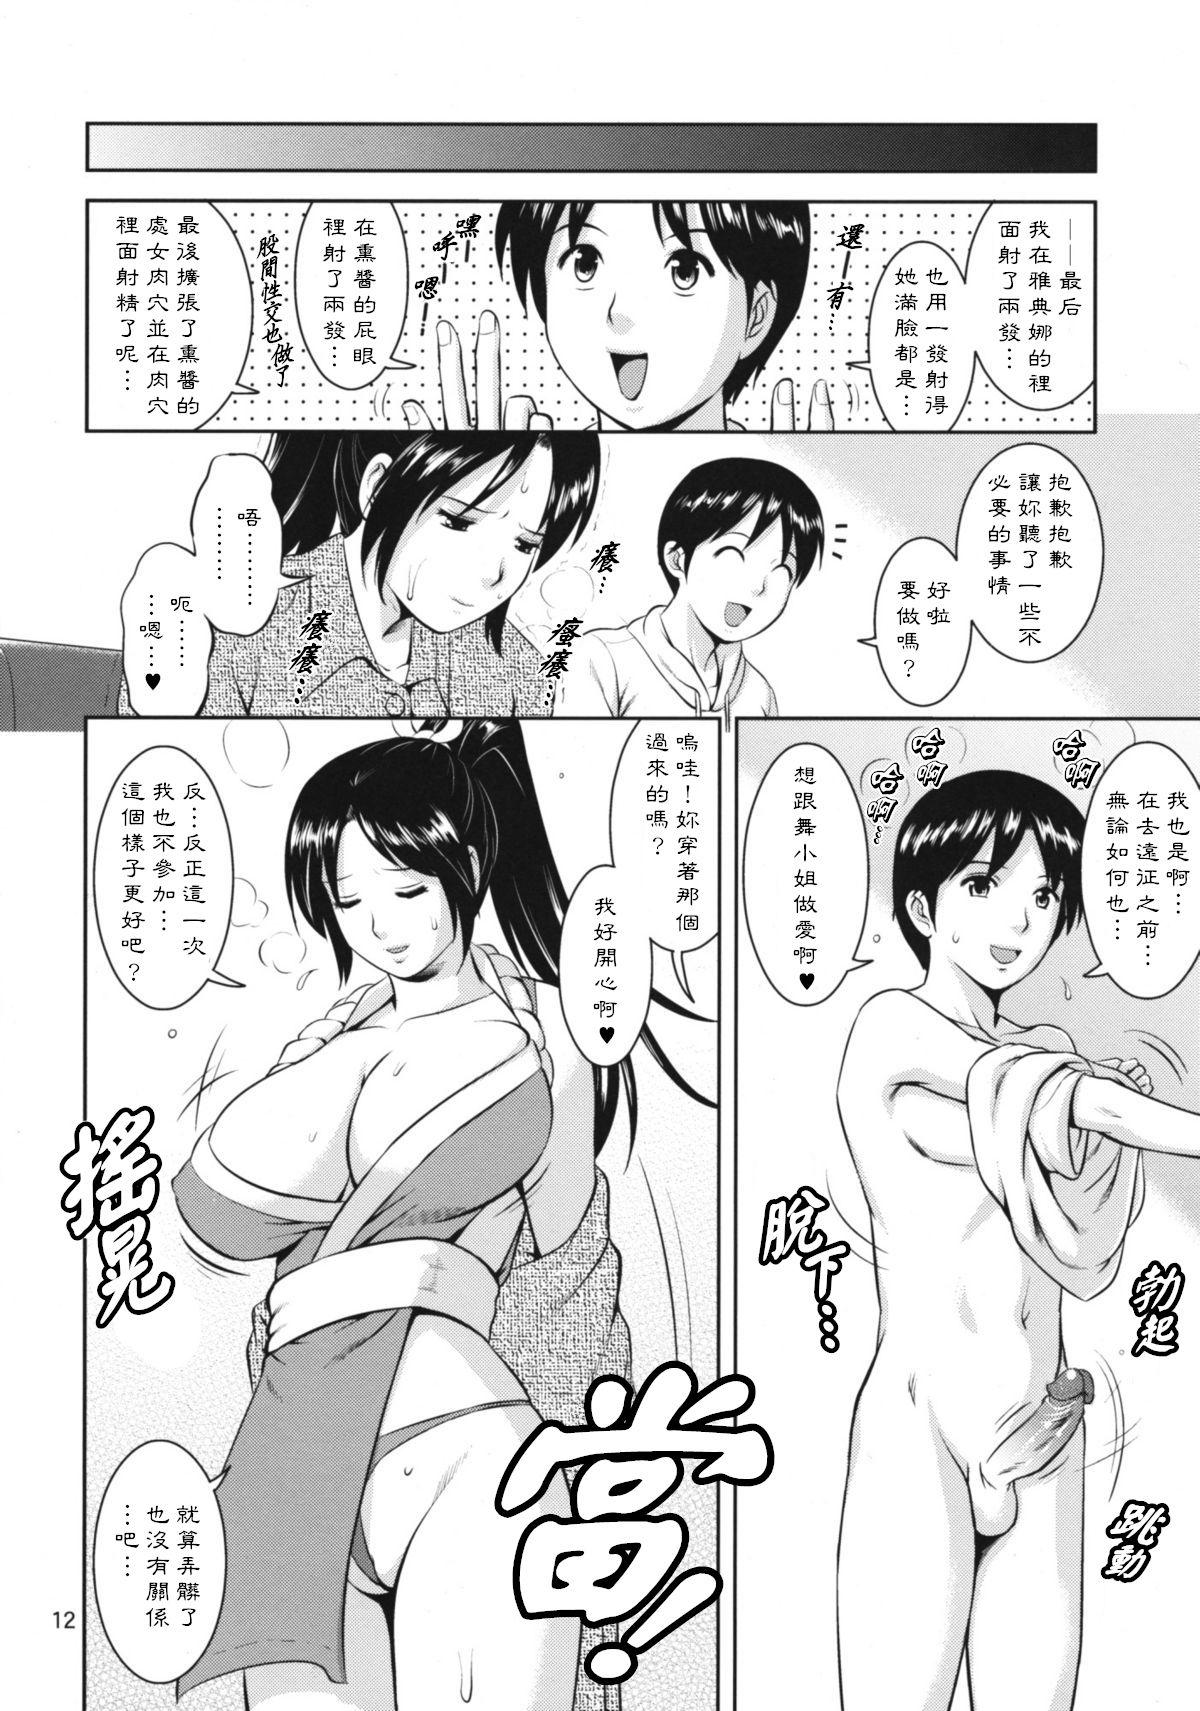 Housewife The Yuri & Friends 2009 UM - Unparticipation of Mai - King of fighters Beautiful - Page 11